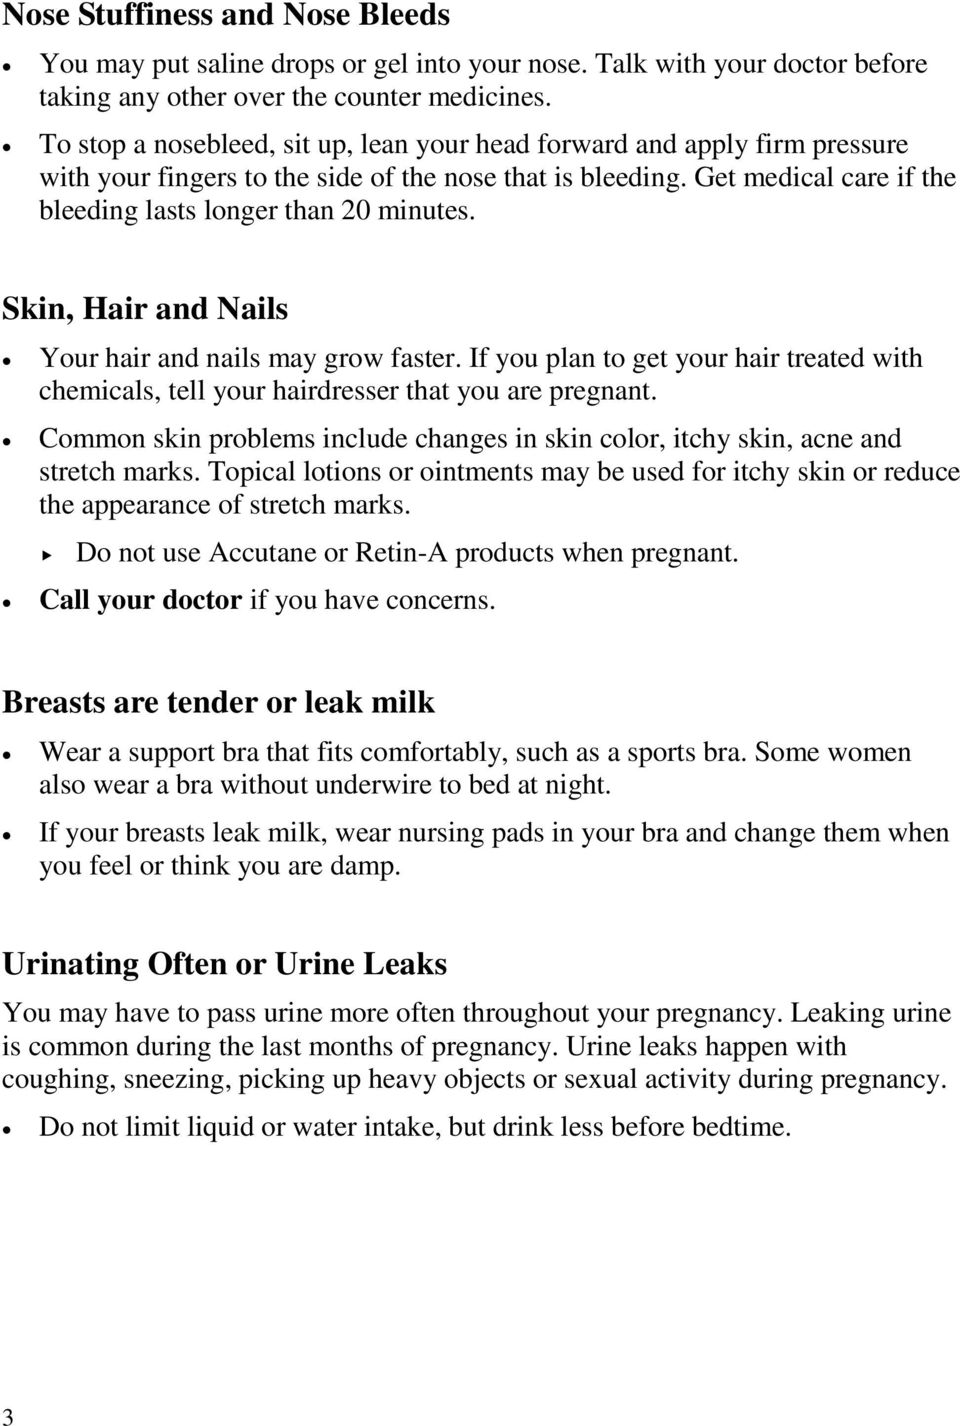 Skin, Hair and Nails Your hair and nails may grow faster. If you plan to get your hair treated with chemicals, tell your hairdresser that you are pregnant.